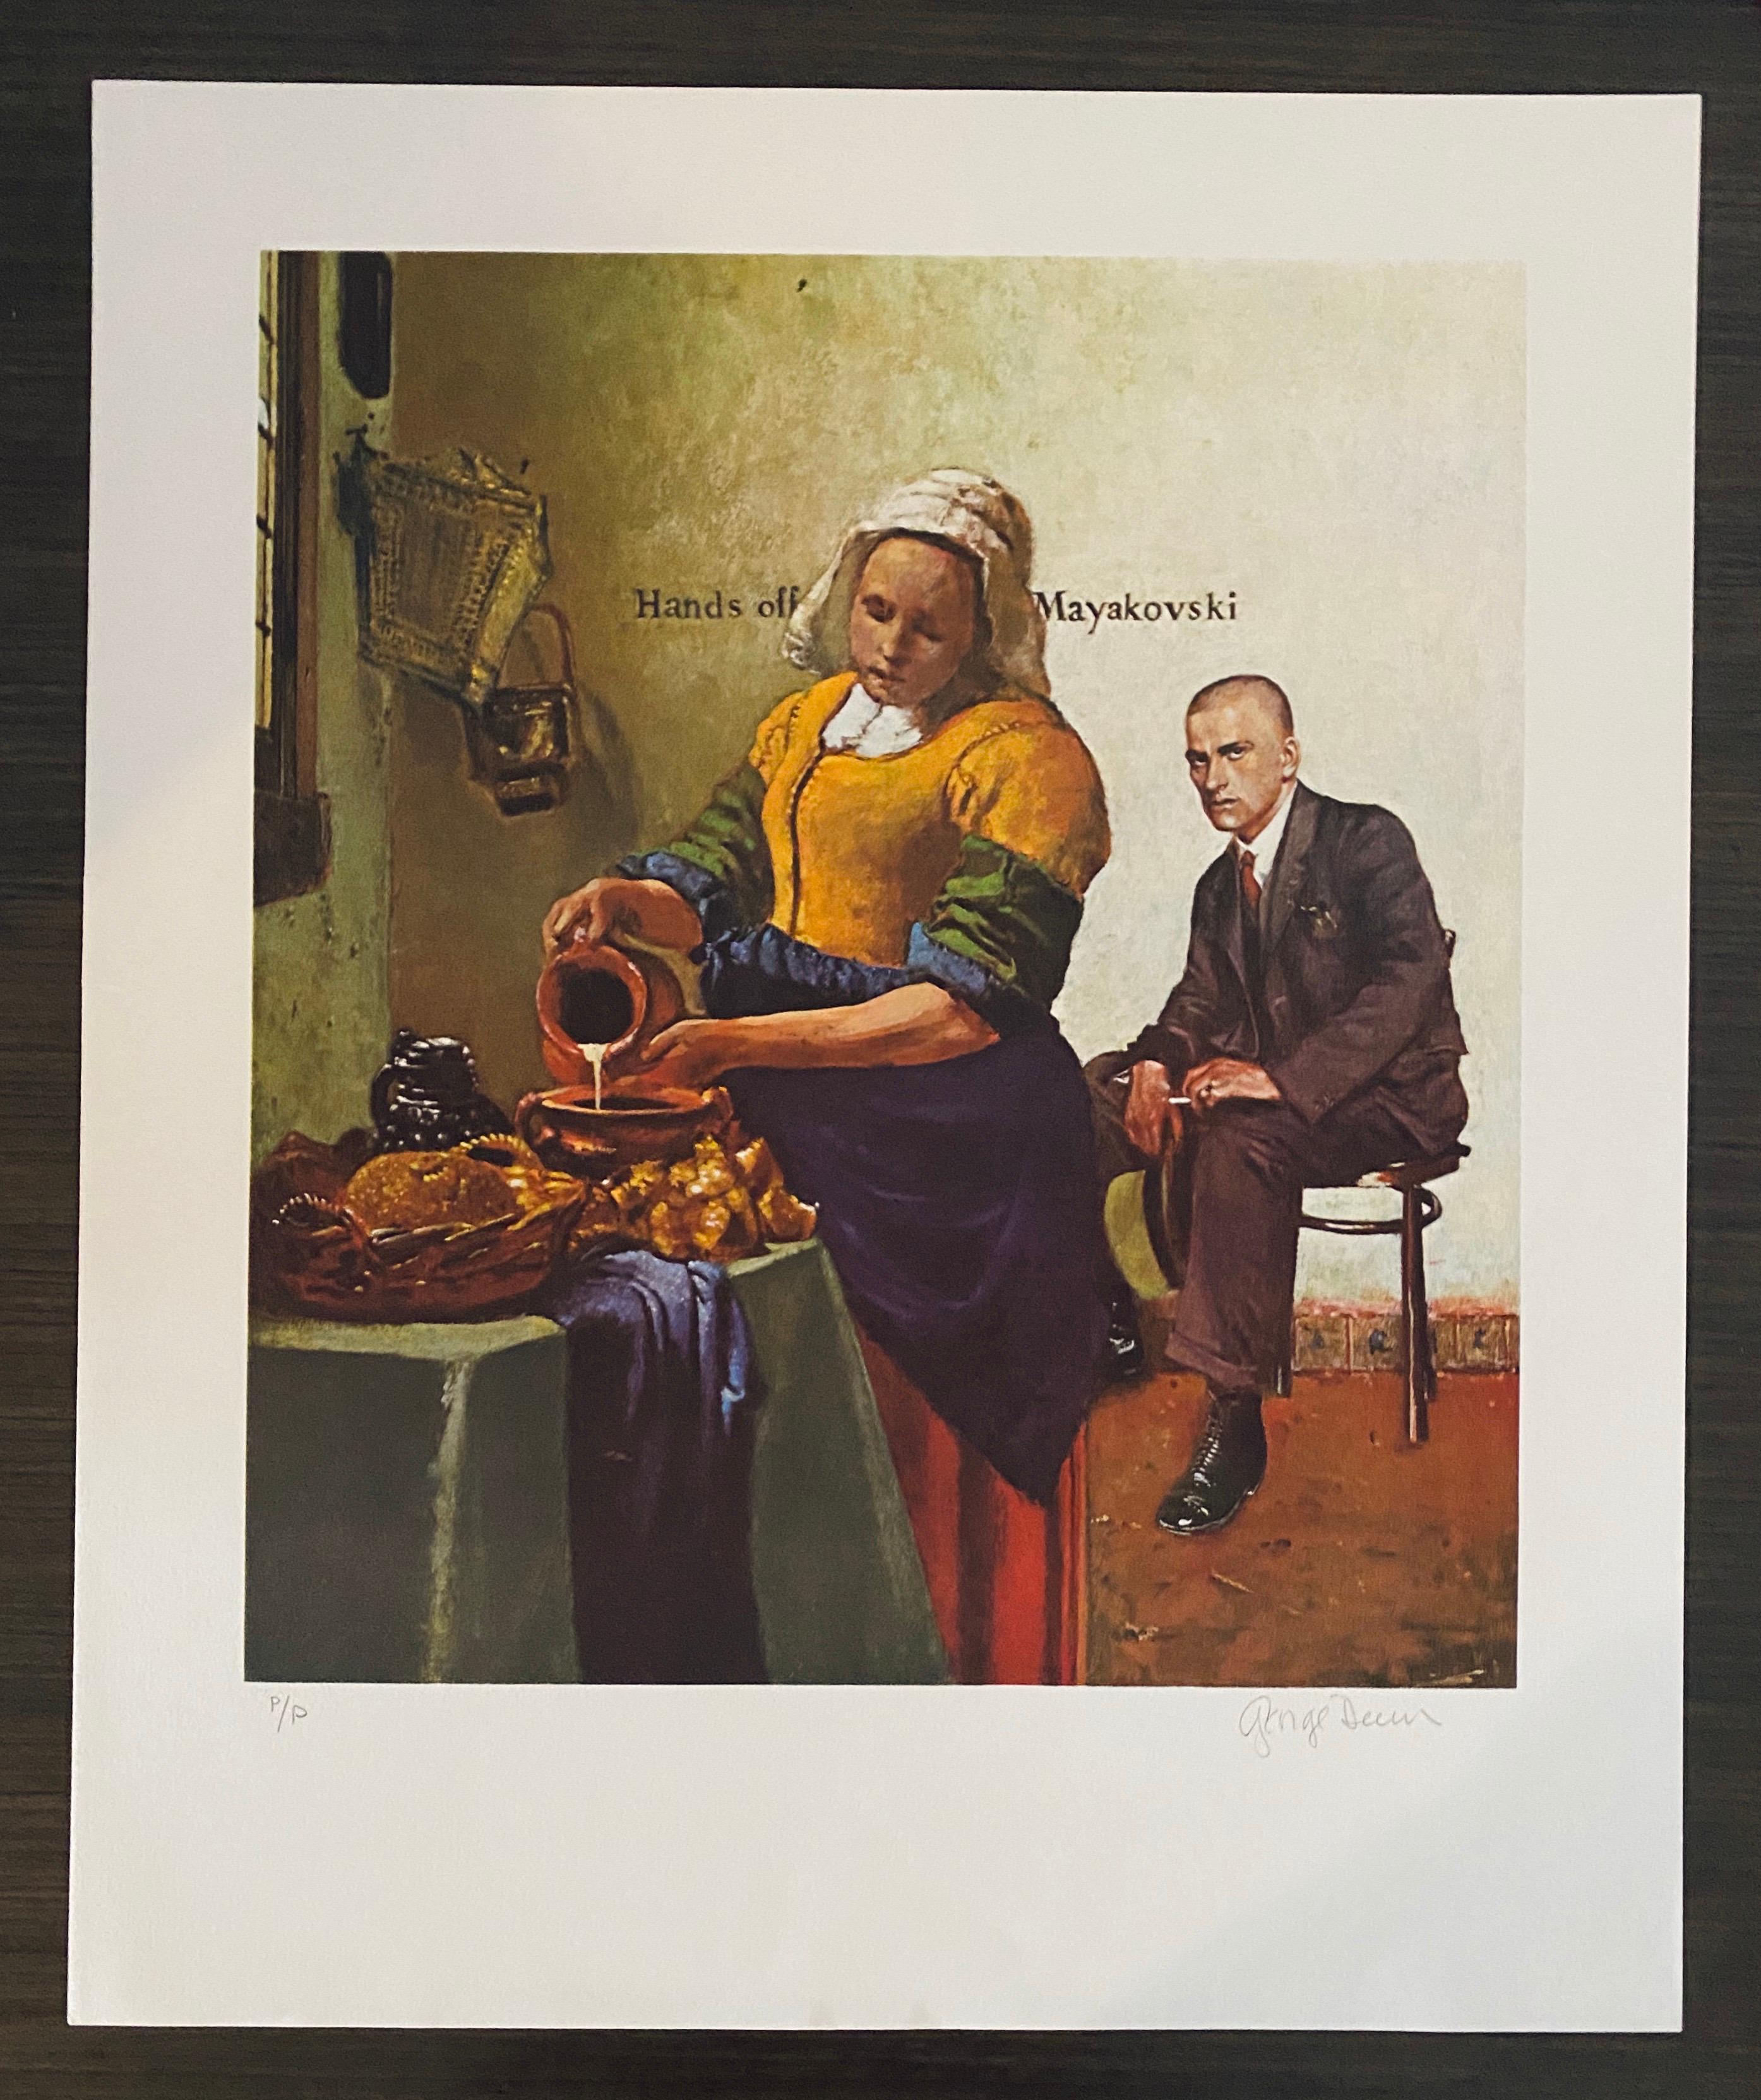 American Artist Signed Color Lithograph Titled "Hands Off Mayakovsky"